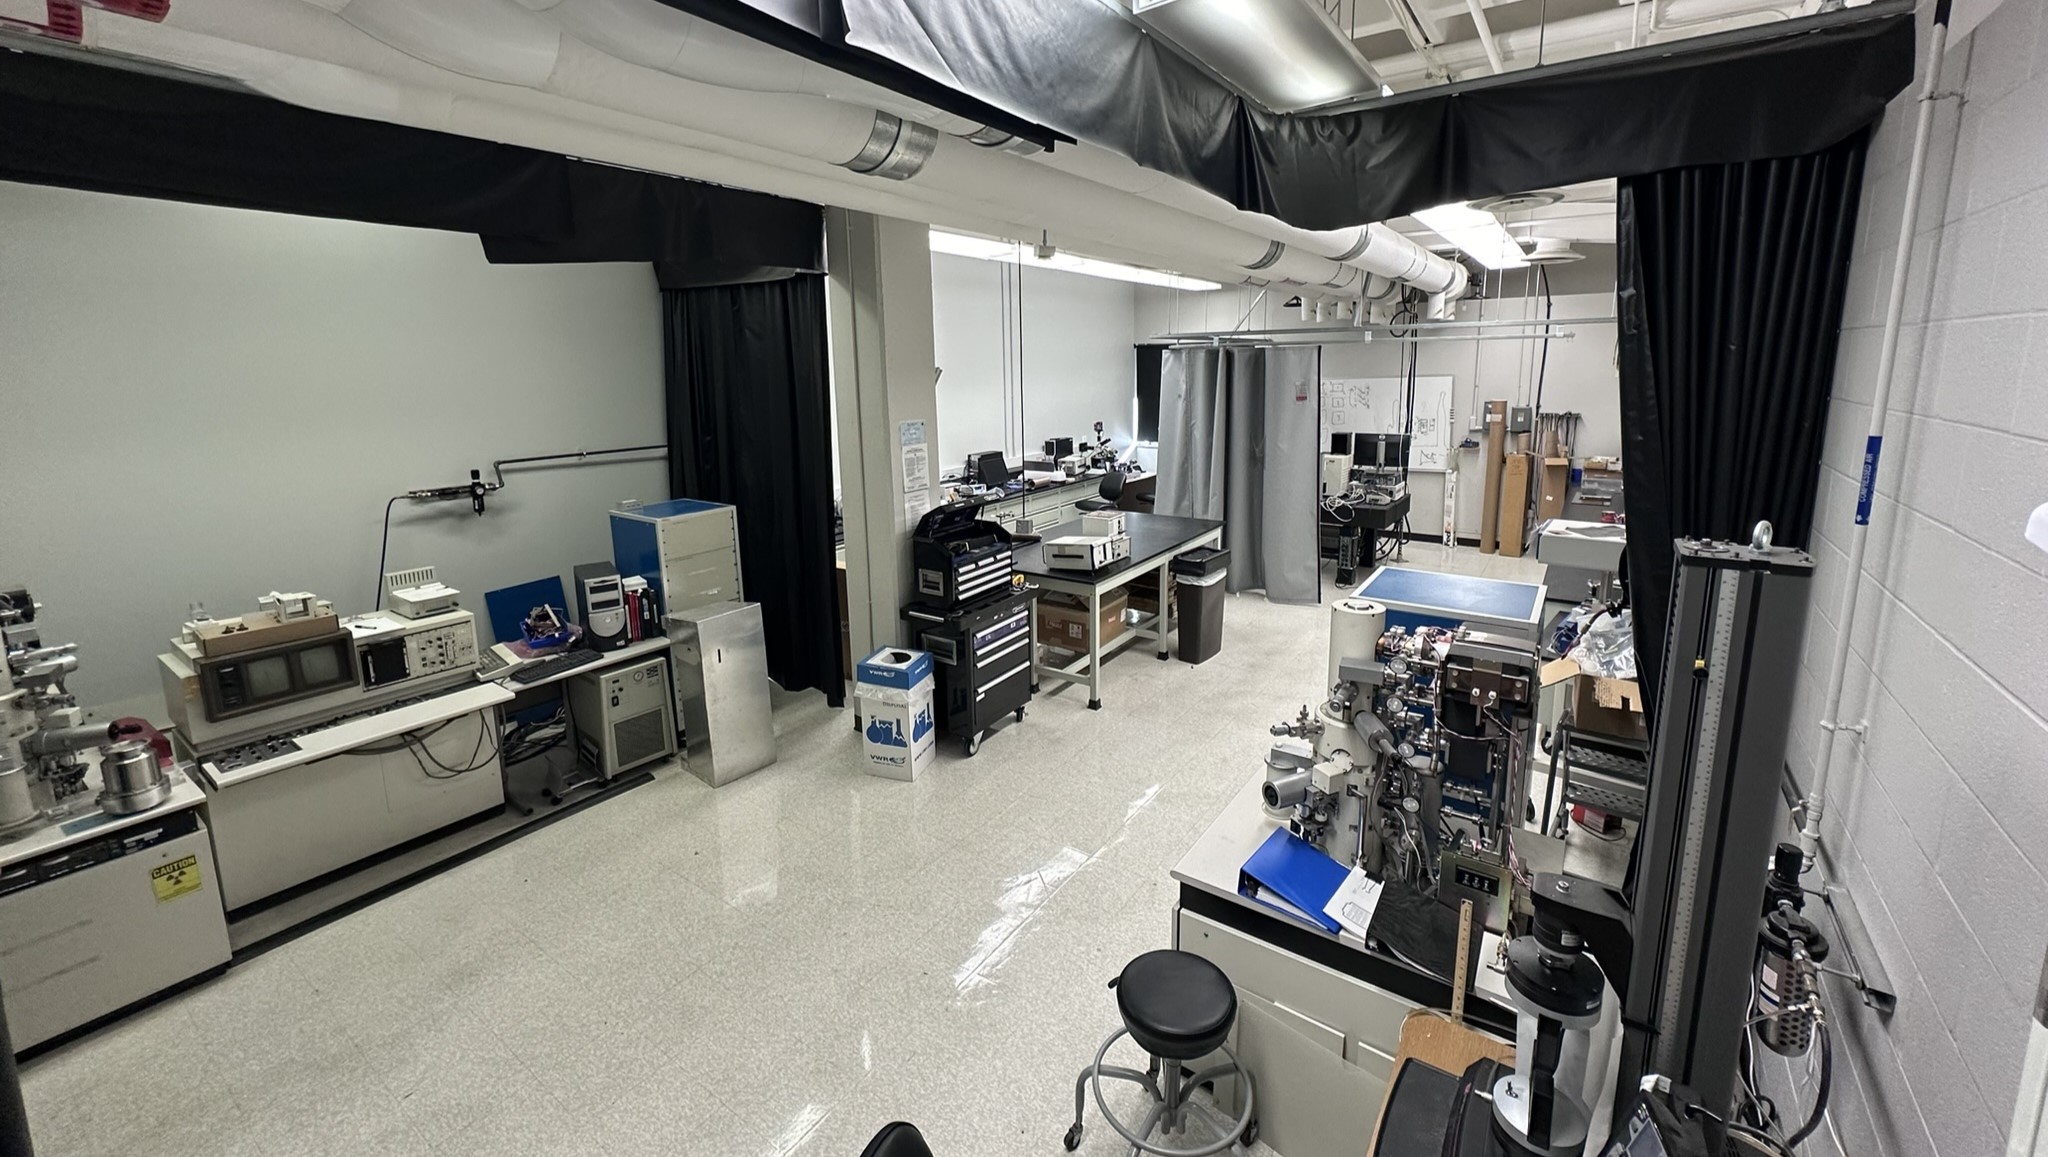 Overhead view of the Nanomaterial Characterization Lab showing lab benches with insturmentation